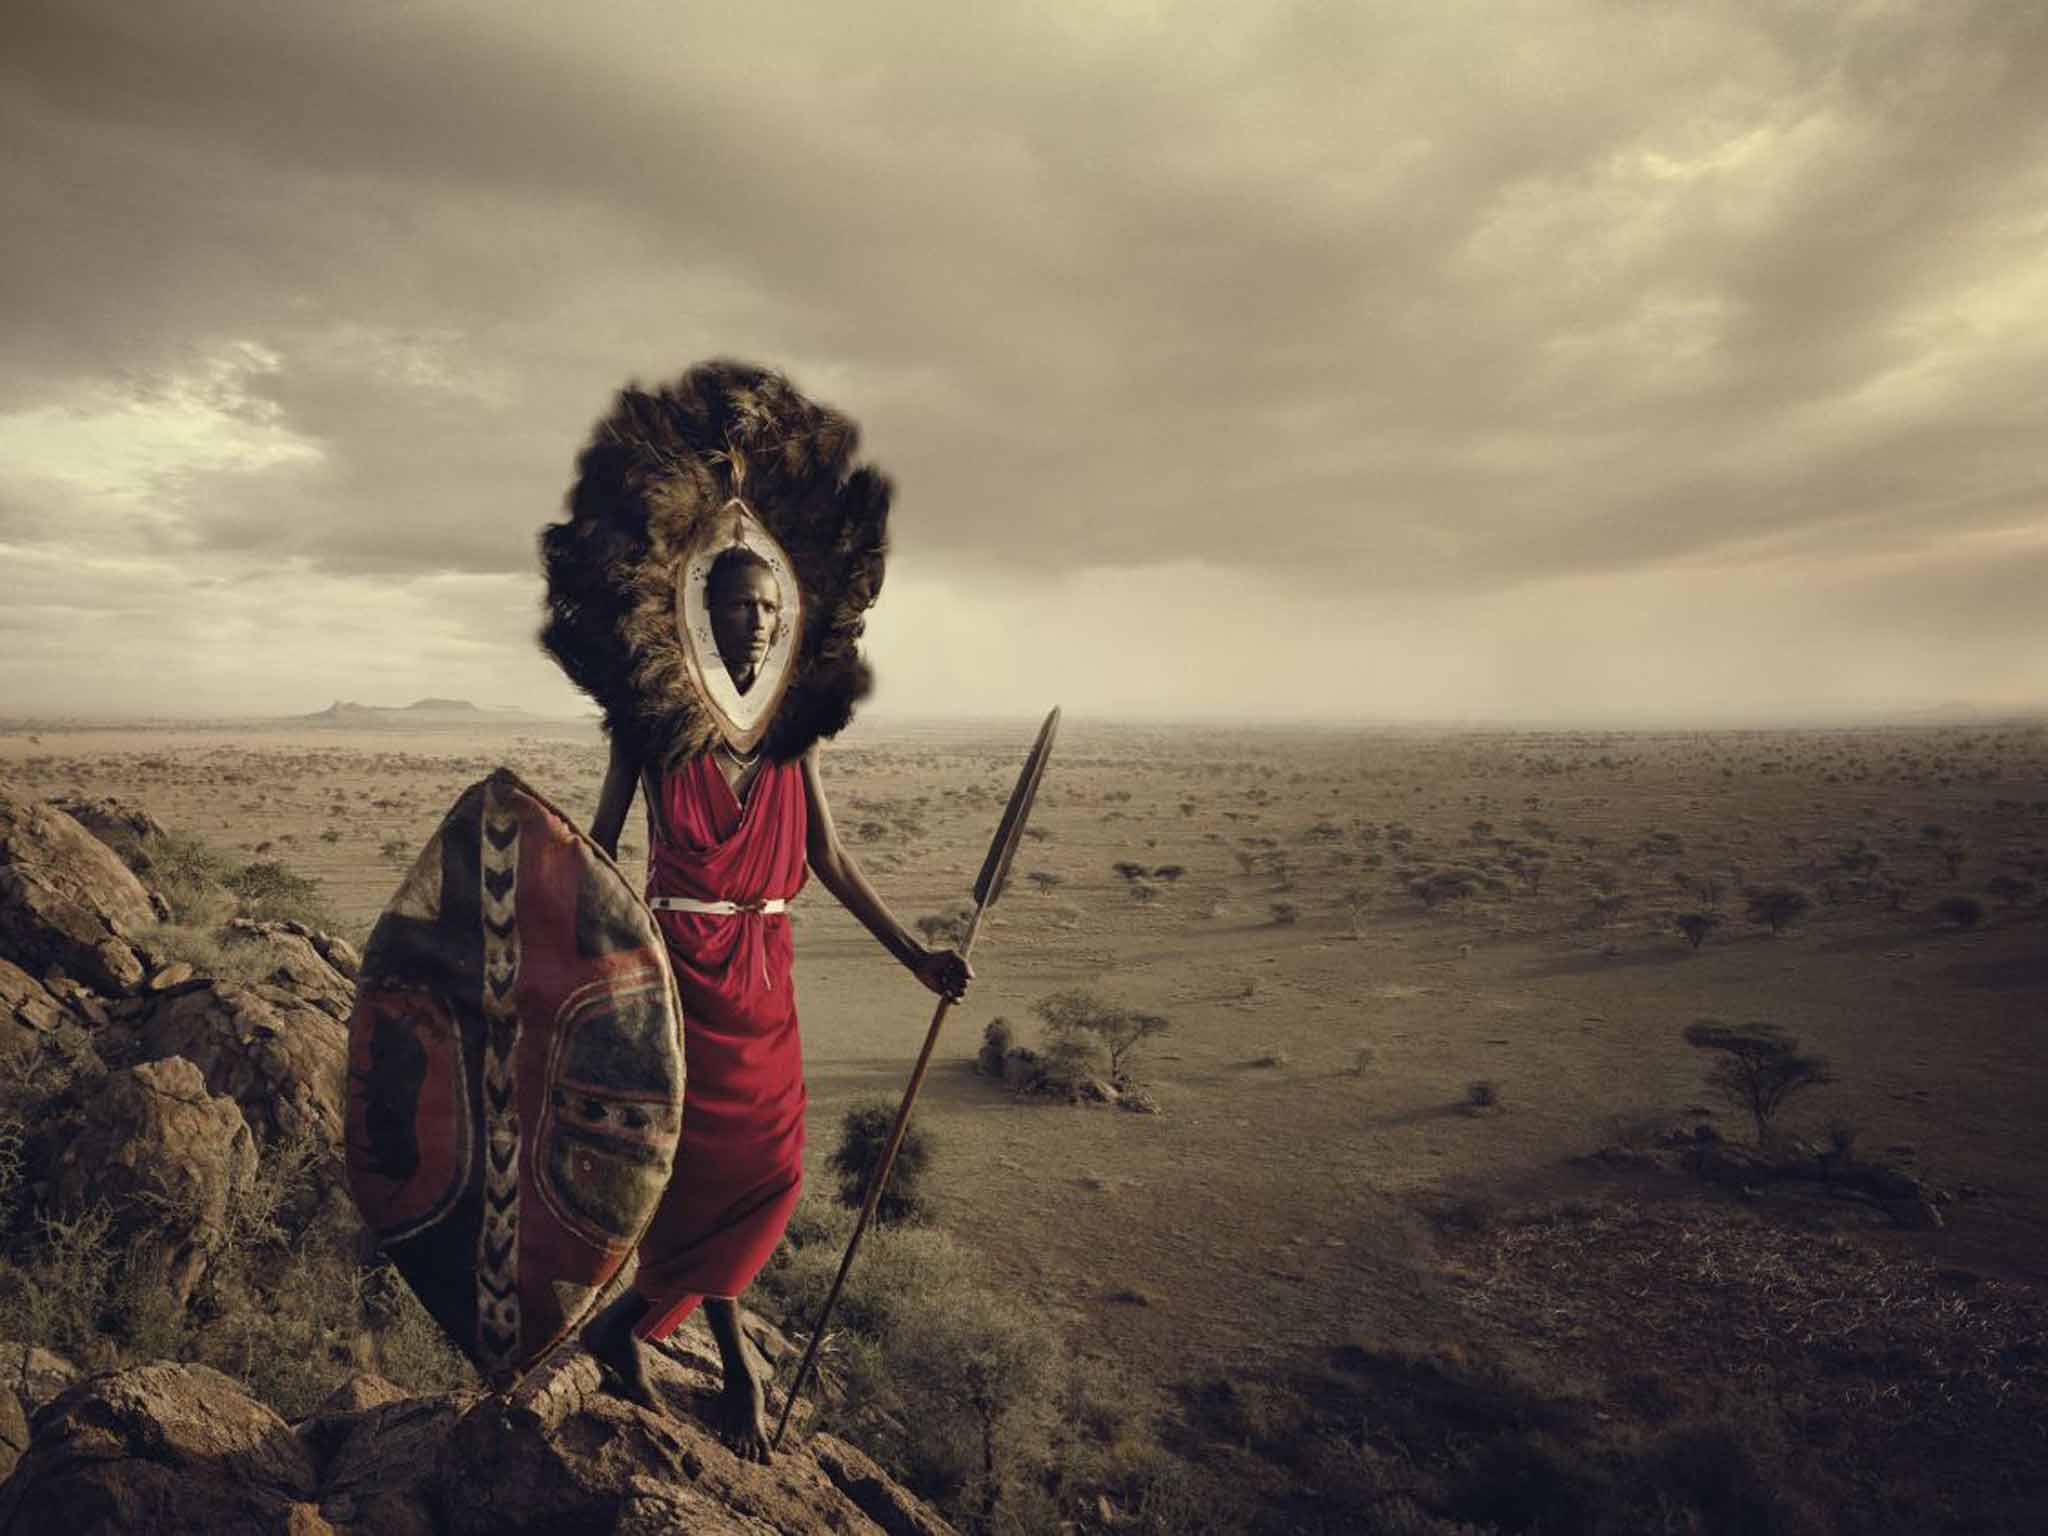 Maasai Warrior, Ngorongoro, Serengeti , Tanzania: The Maasai are one of the 'last great warrior cultures', says Nelson, but are increasingly found in cities, selling modern goods such as mobile phones, alongside goats and cows